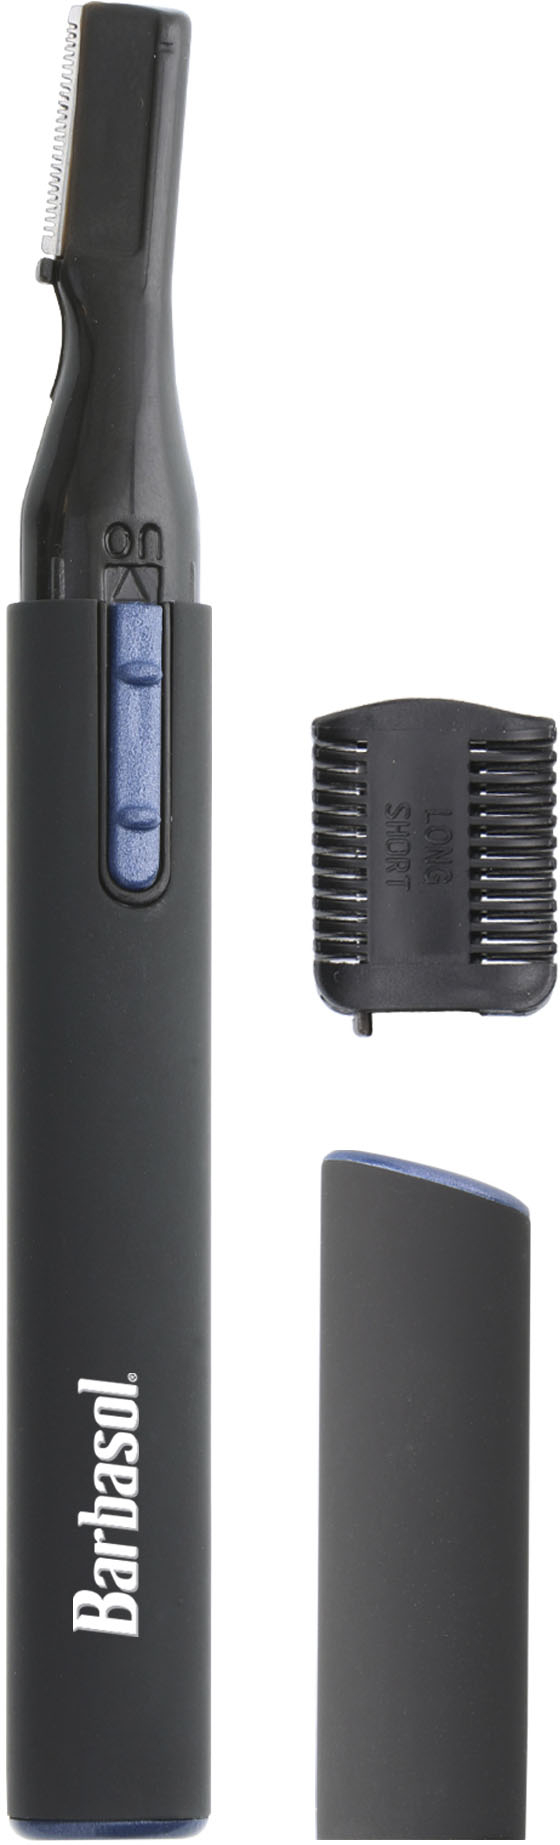 Left View: Braun Series XT5 Rechargeable Wet/Dry Electric Shaver Kit - Black